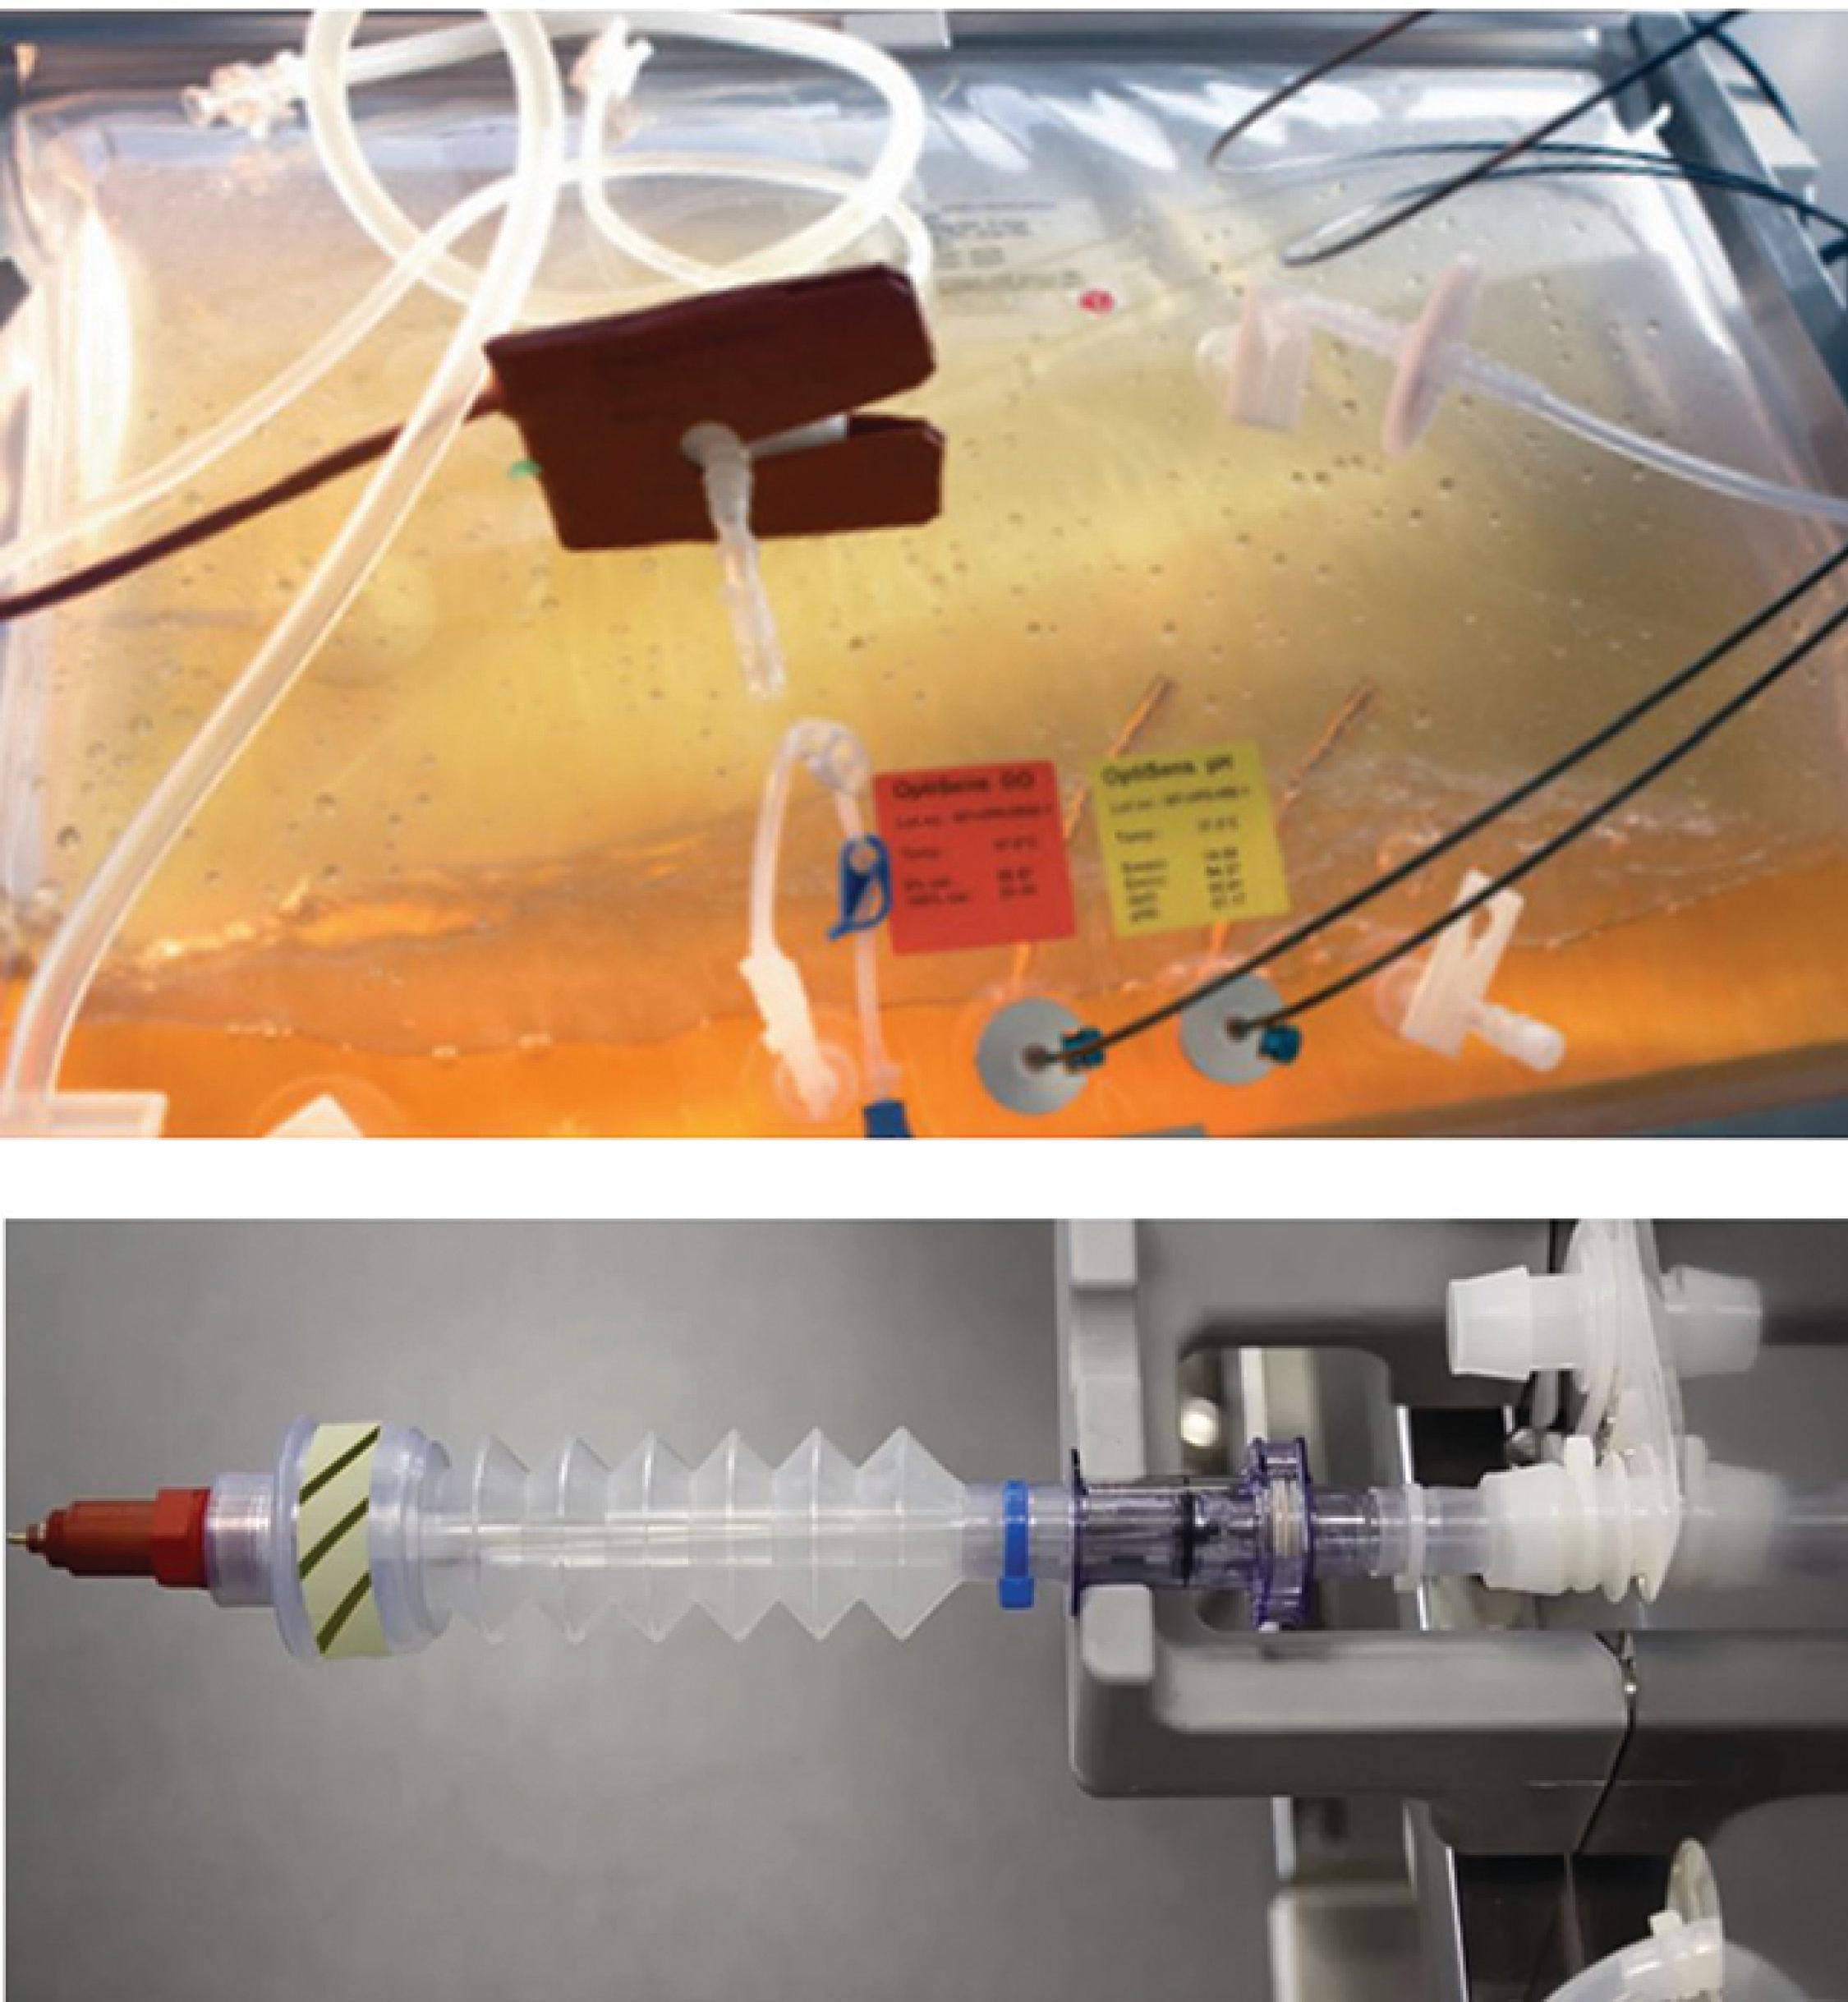 INTO Single-Use Bags making bioprocess easier - BioProcess Solutions